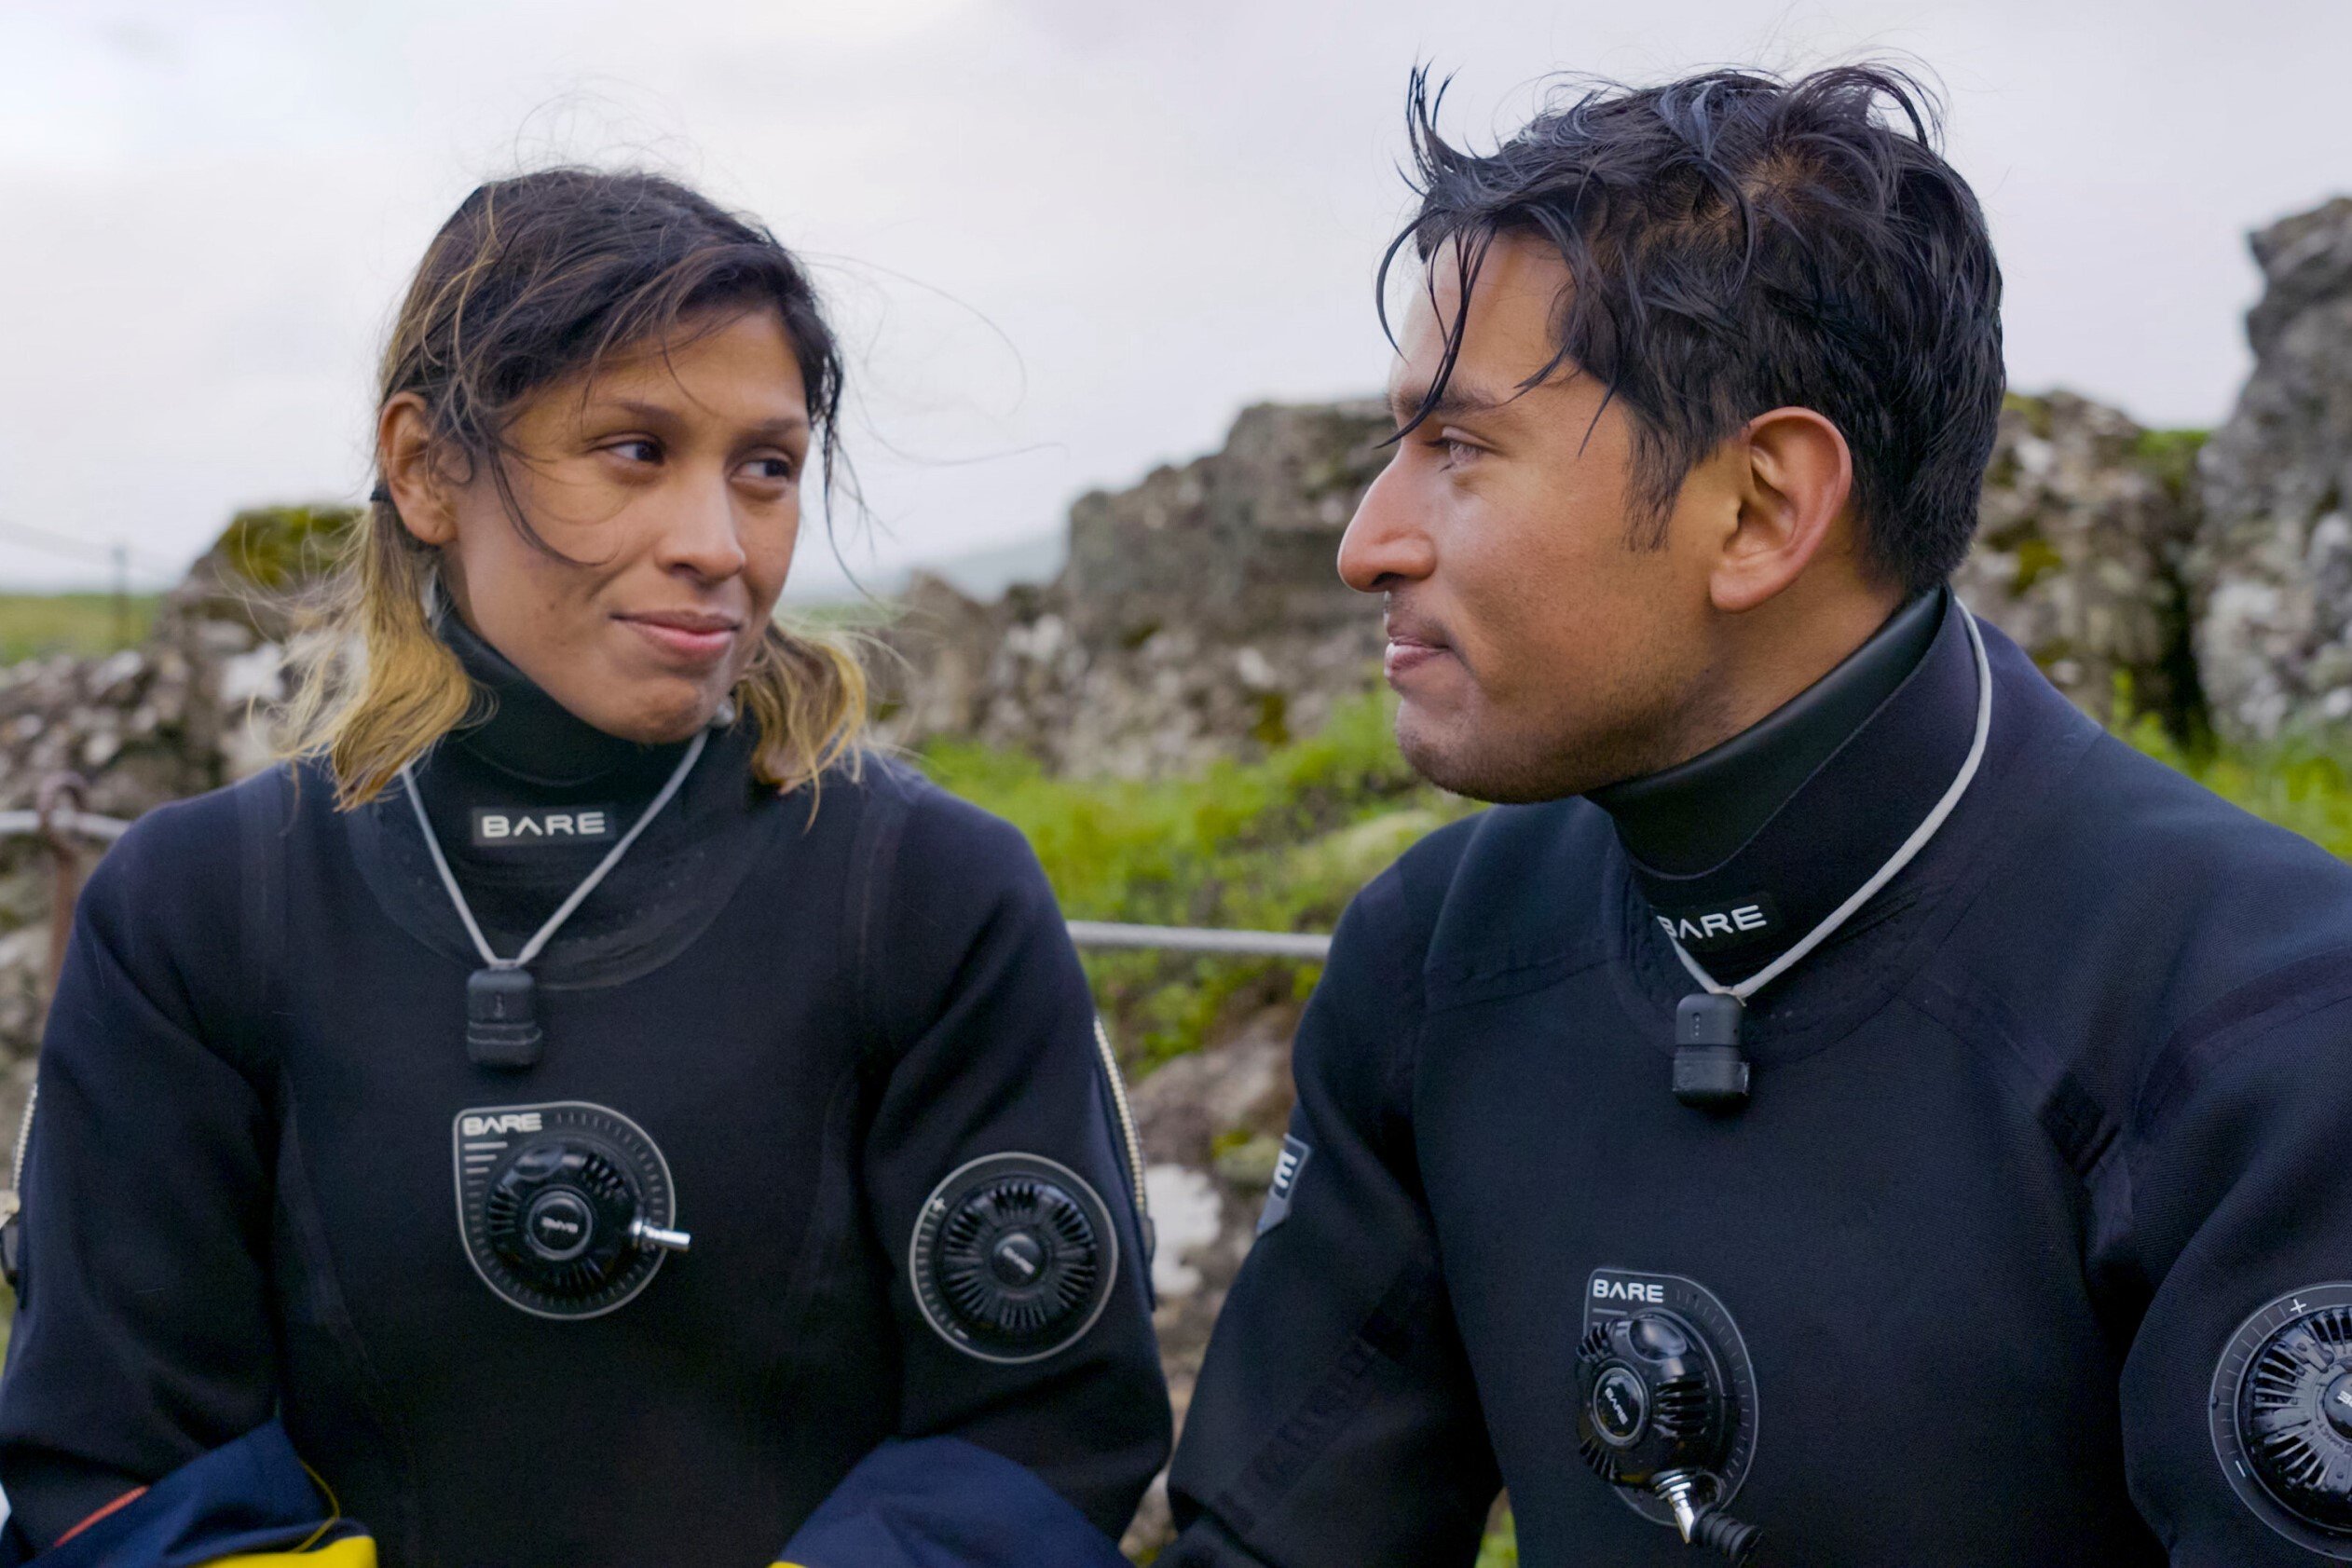 Aubrey Ares and David Hernandez, who starred in 'The Amazing Race 34' Episode 11 on CBS, wear black diving suits.